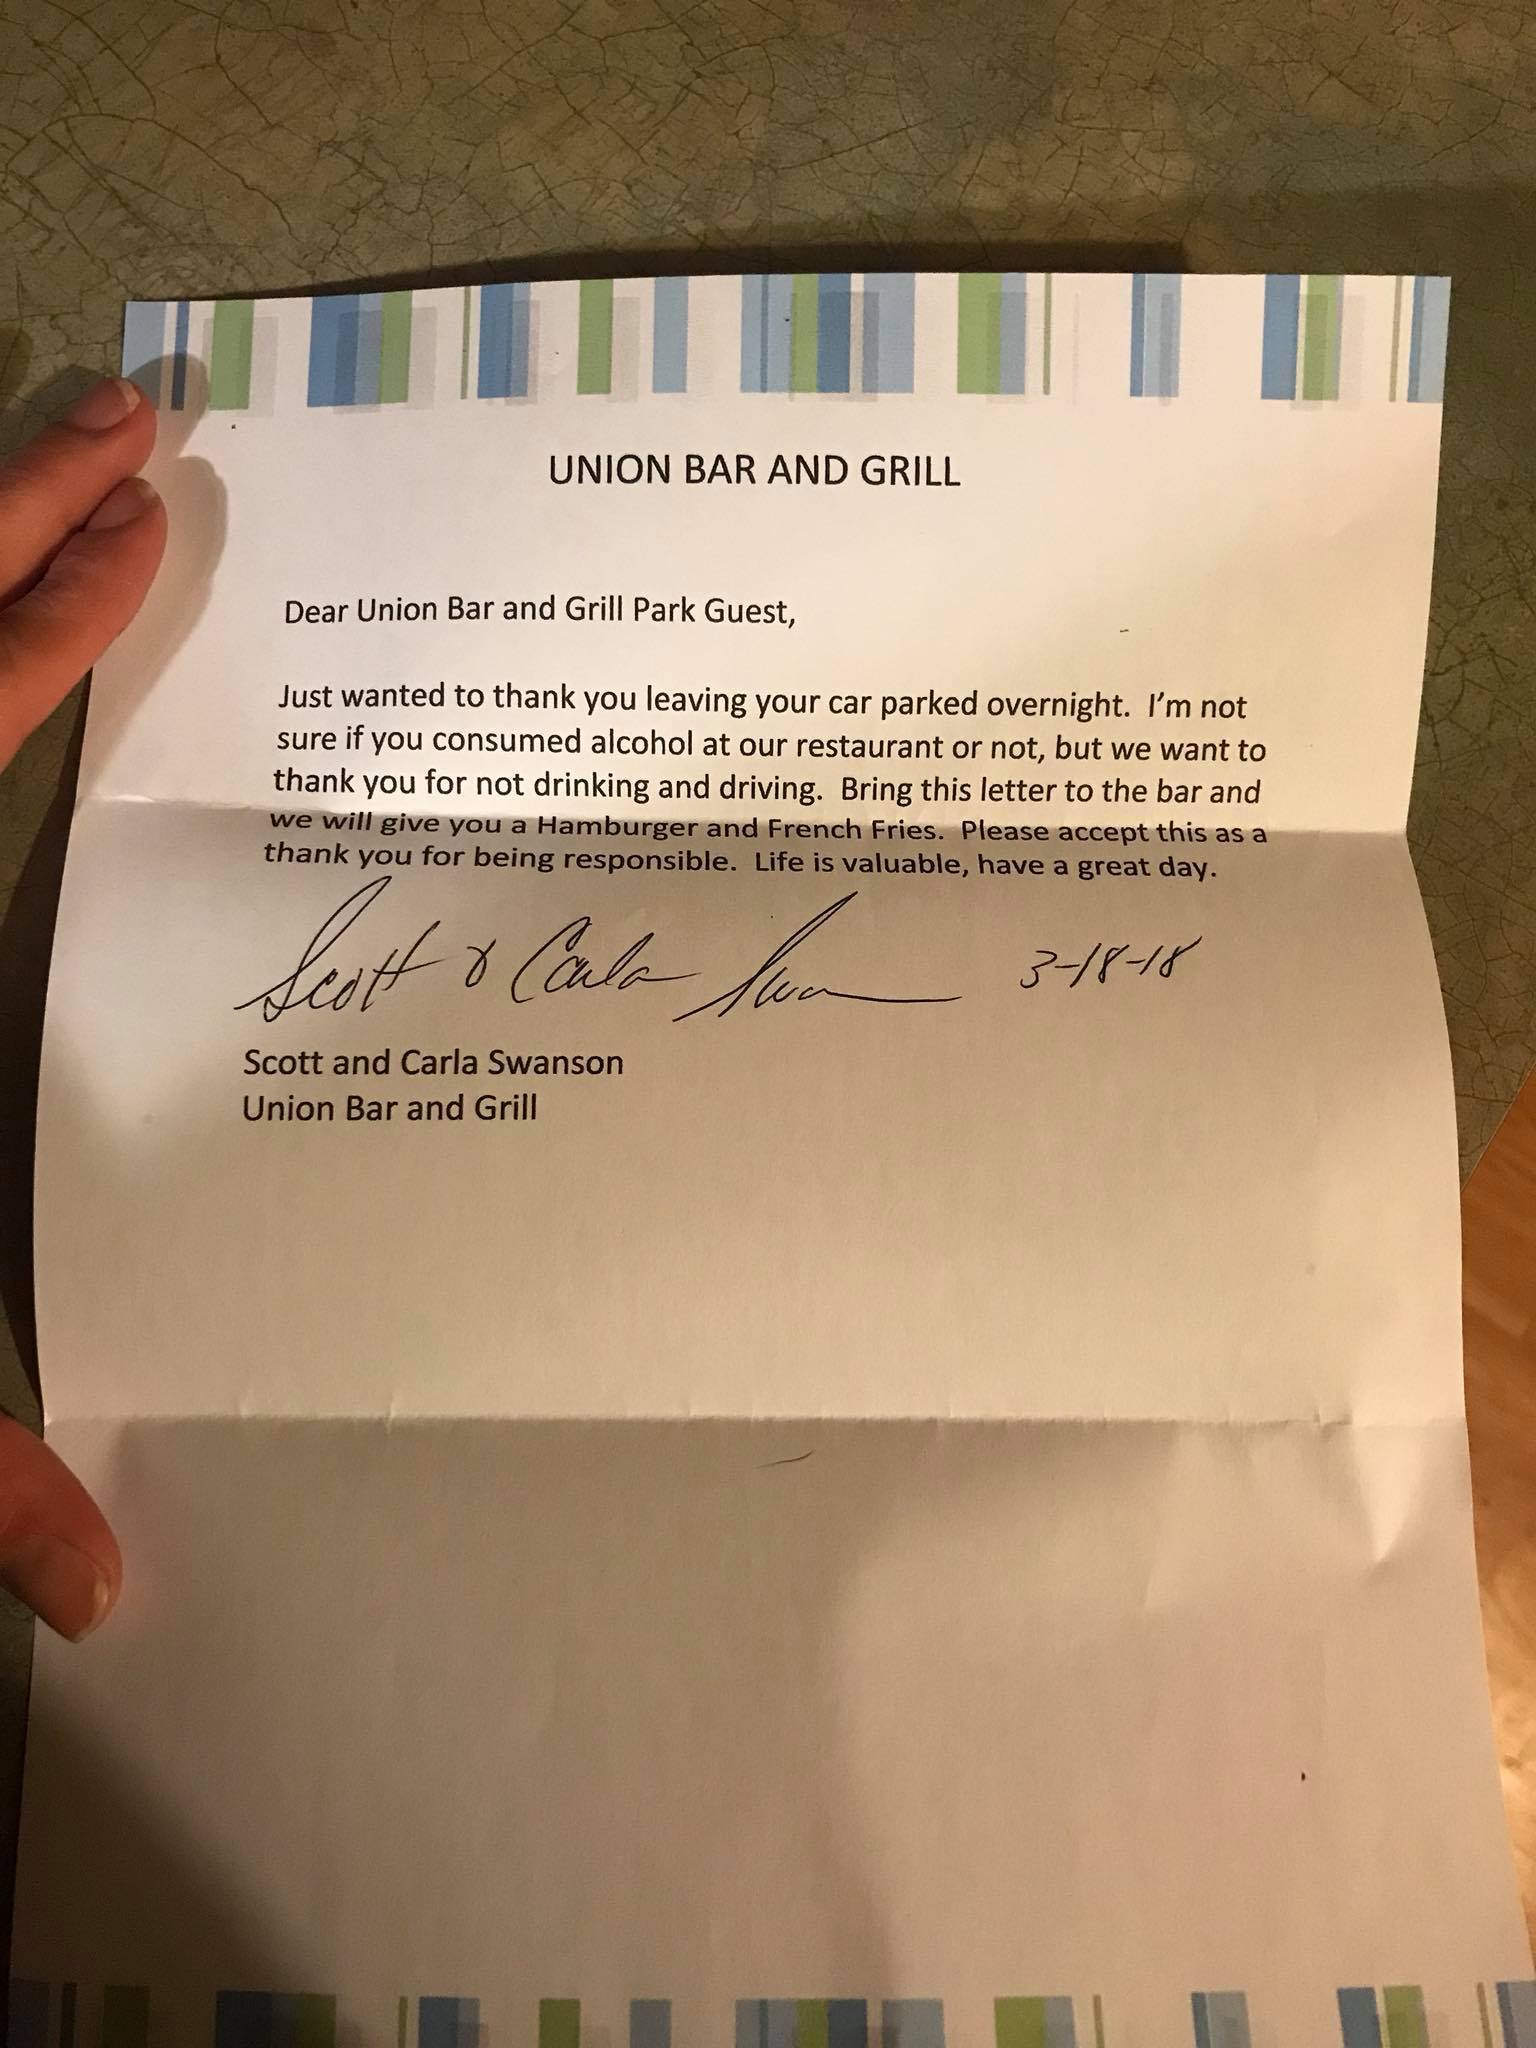 “More bars should take note from Scott and Carla Swanson. Austin (my husband) met a friend at the bar last night so he left his truck there and I picked him up. He found this note on his truck this morning when I took him to go get it. ?” — Janelle Martin